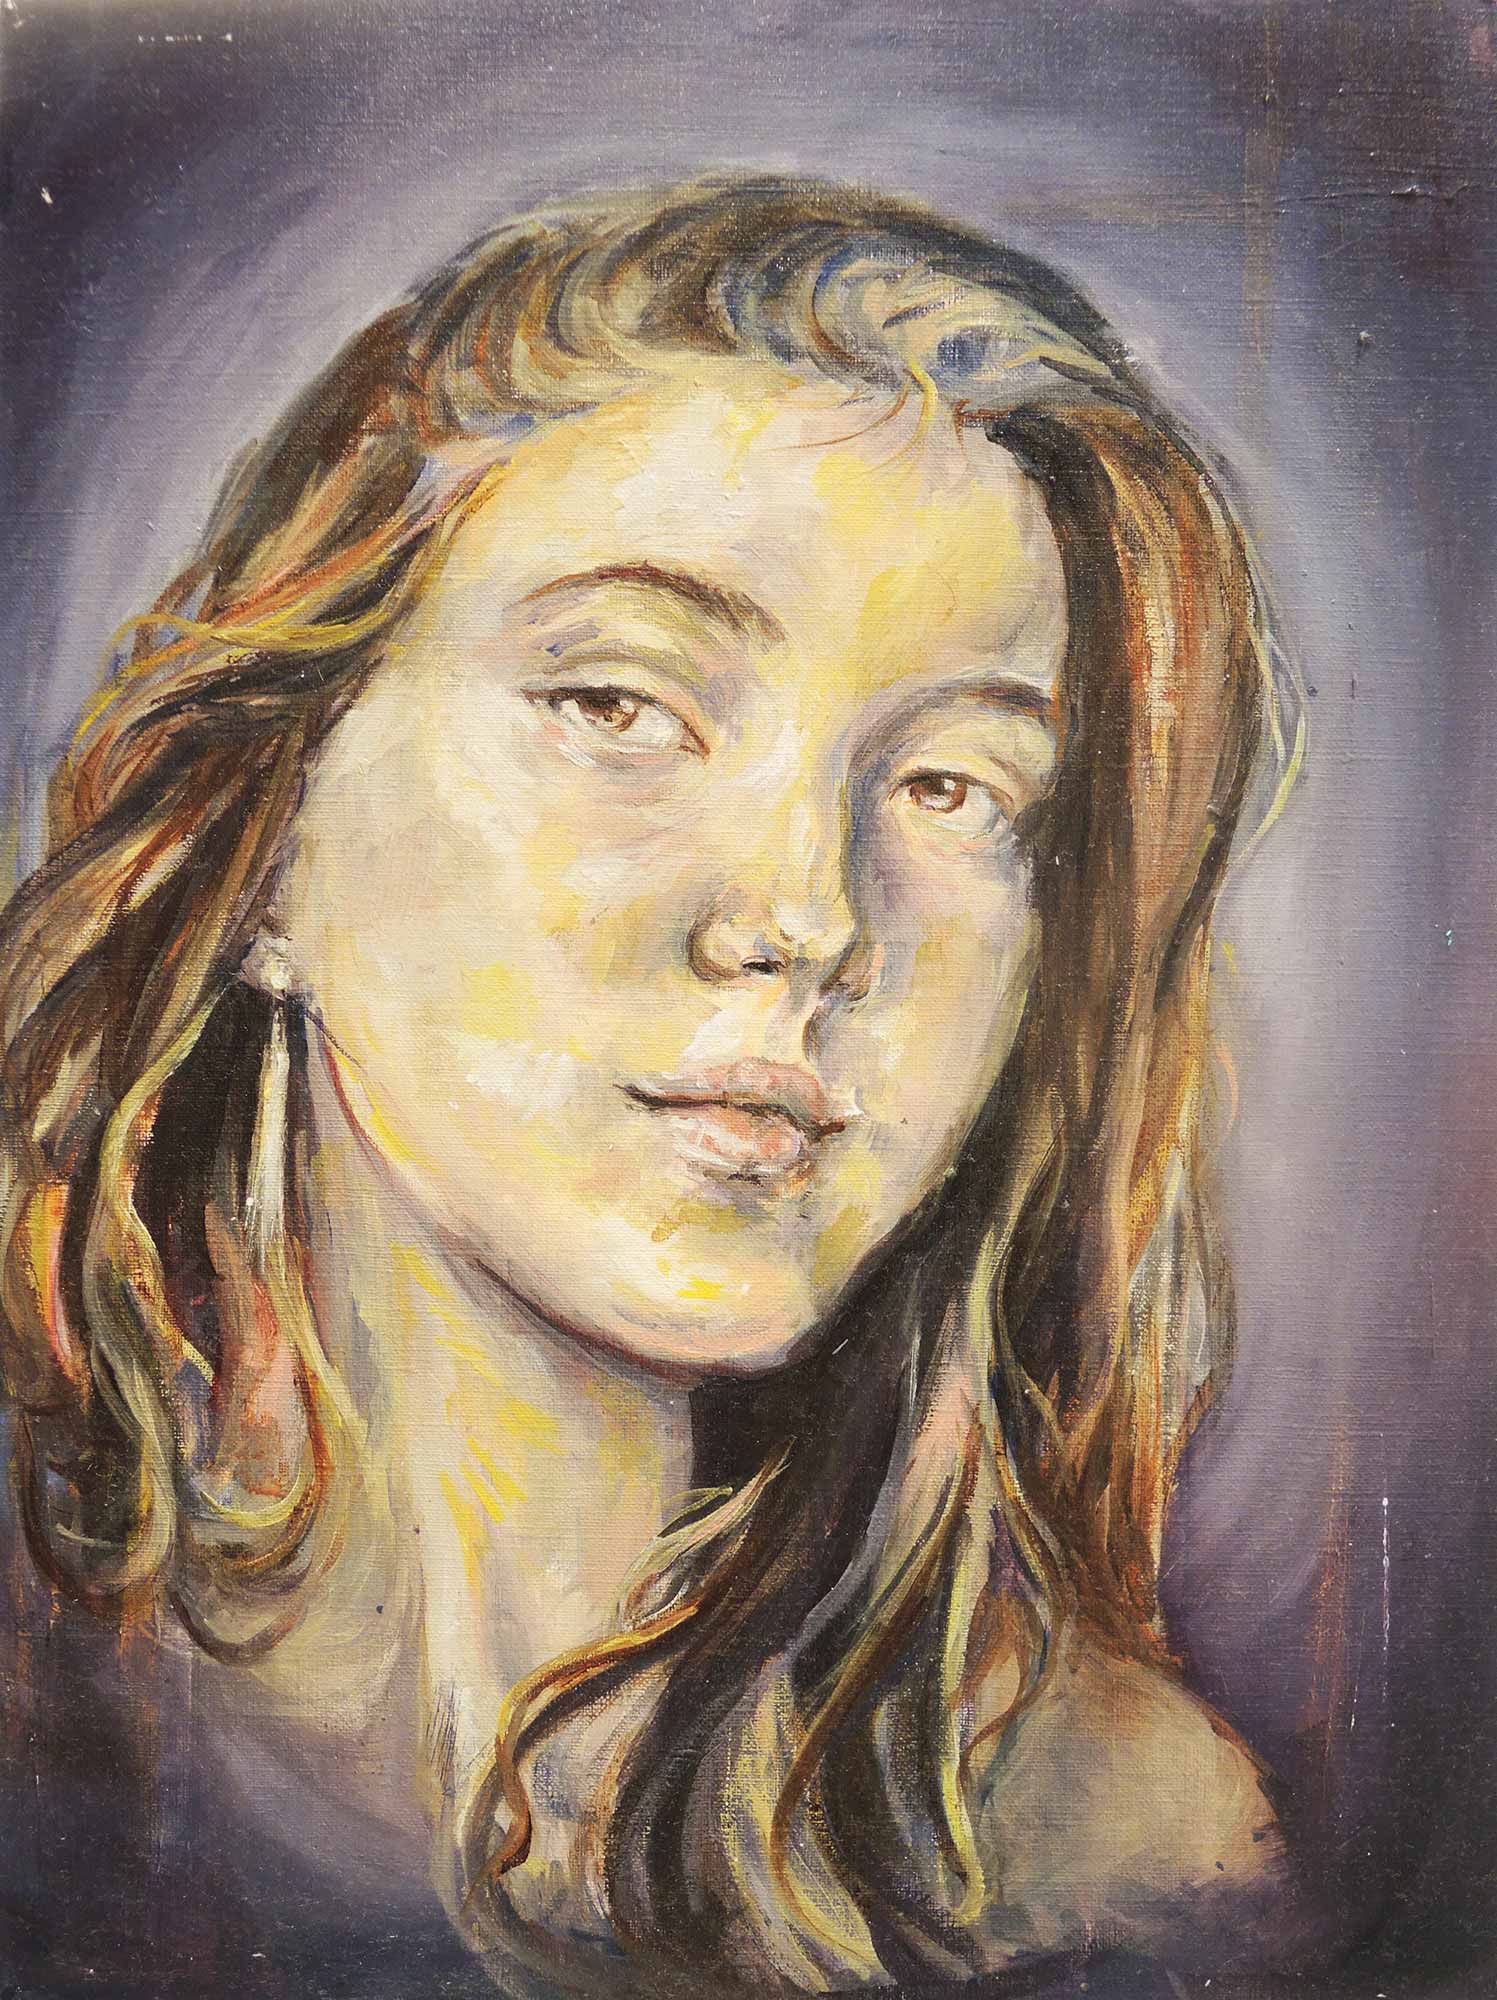 A painting of a young girl